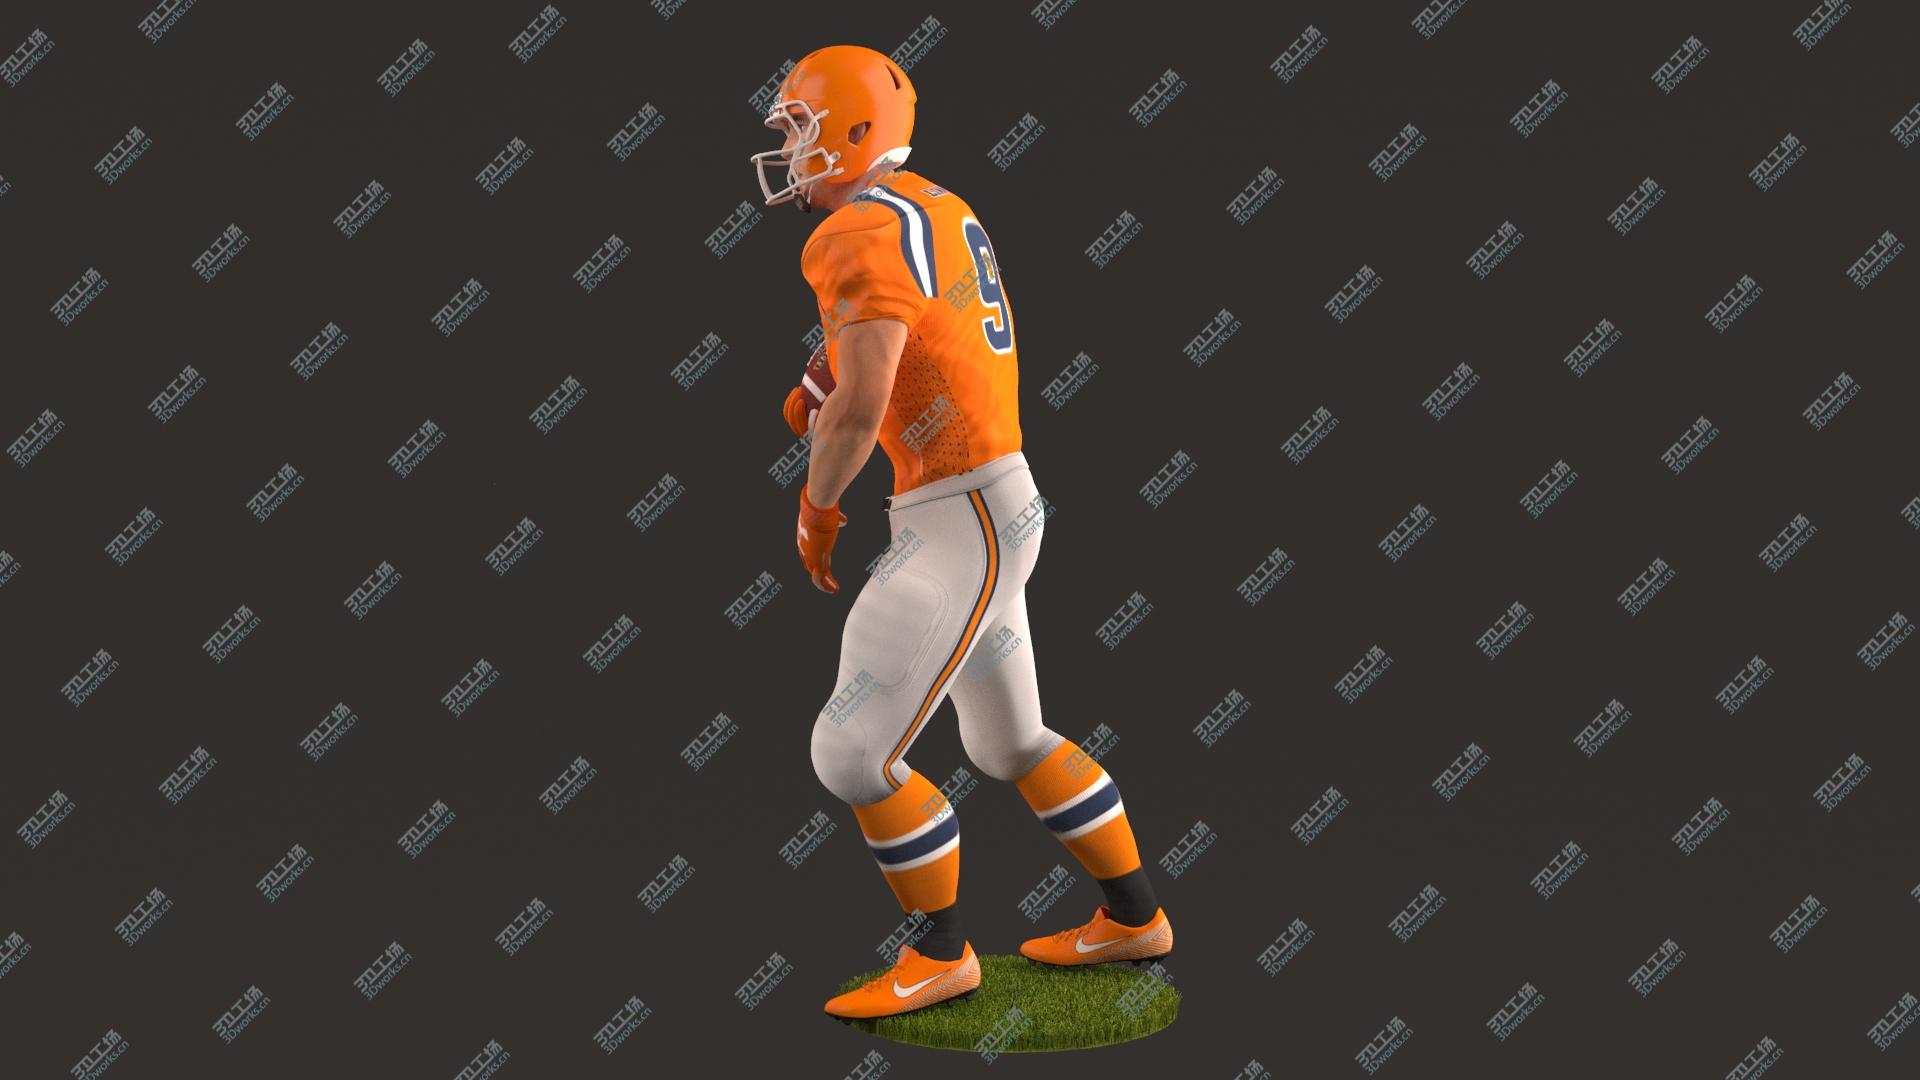 images/goods_img/20210313/3D American Football Player 2020 V6 Rigged/4.jpg